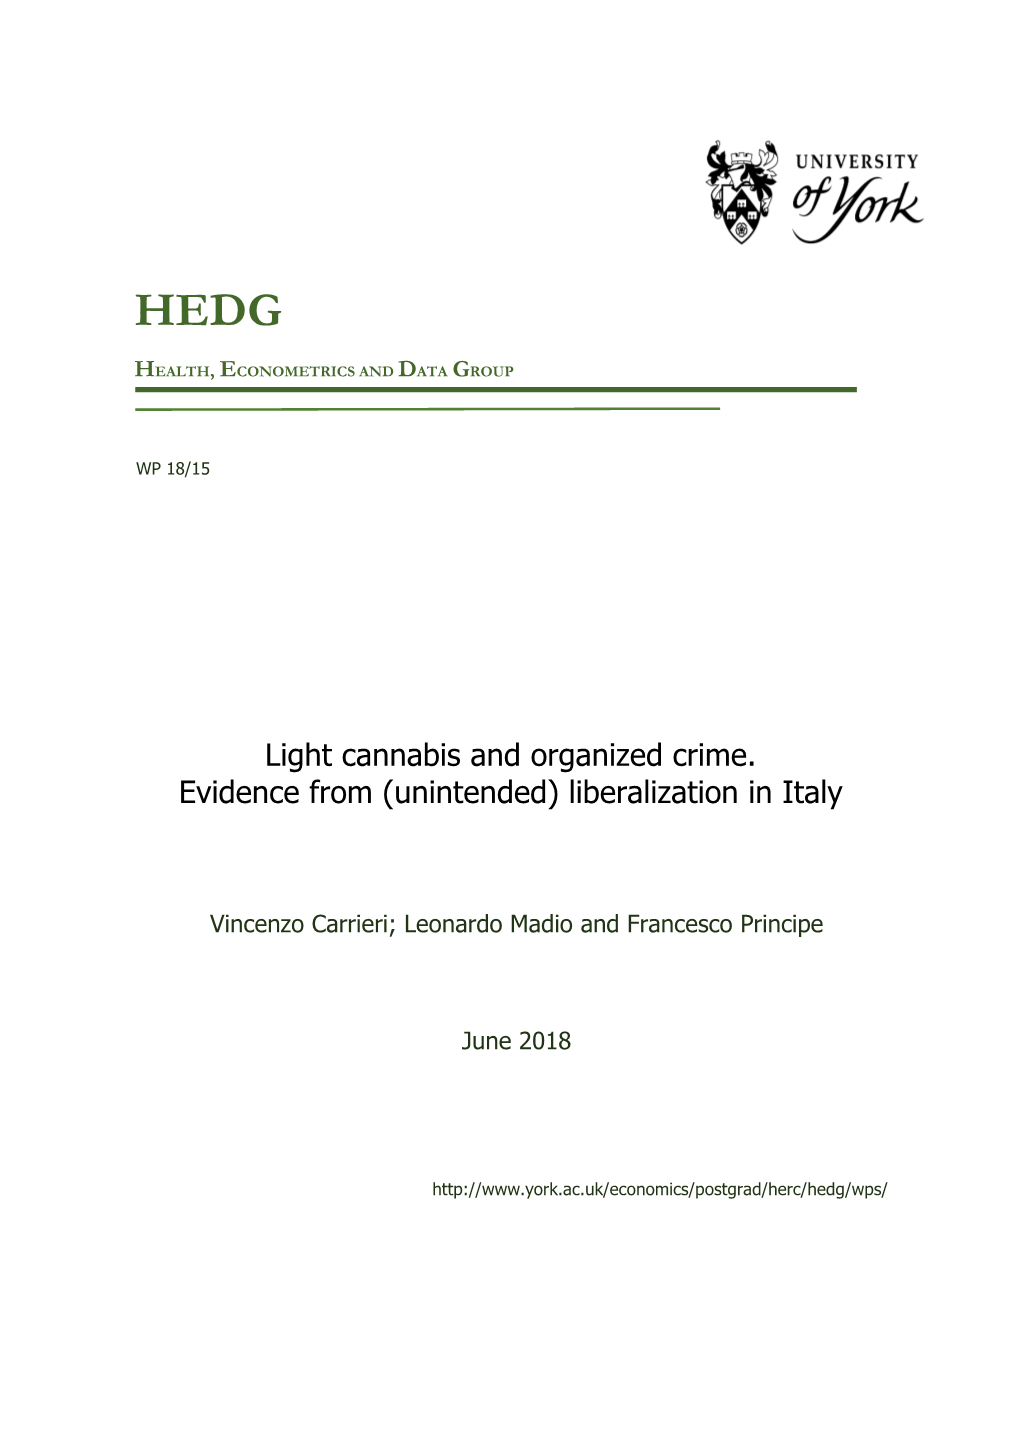 Light Cannabis and Organized Crime. Evidence from (Unintended) Liberalization in Italy